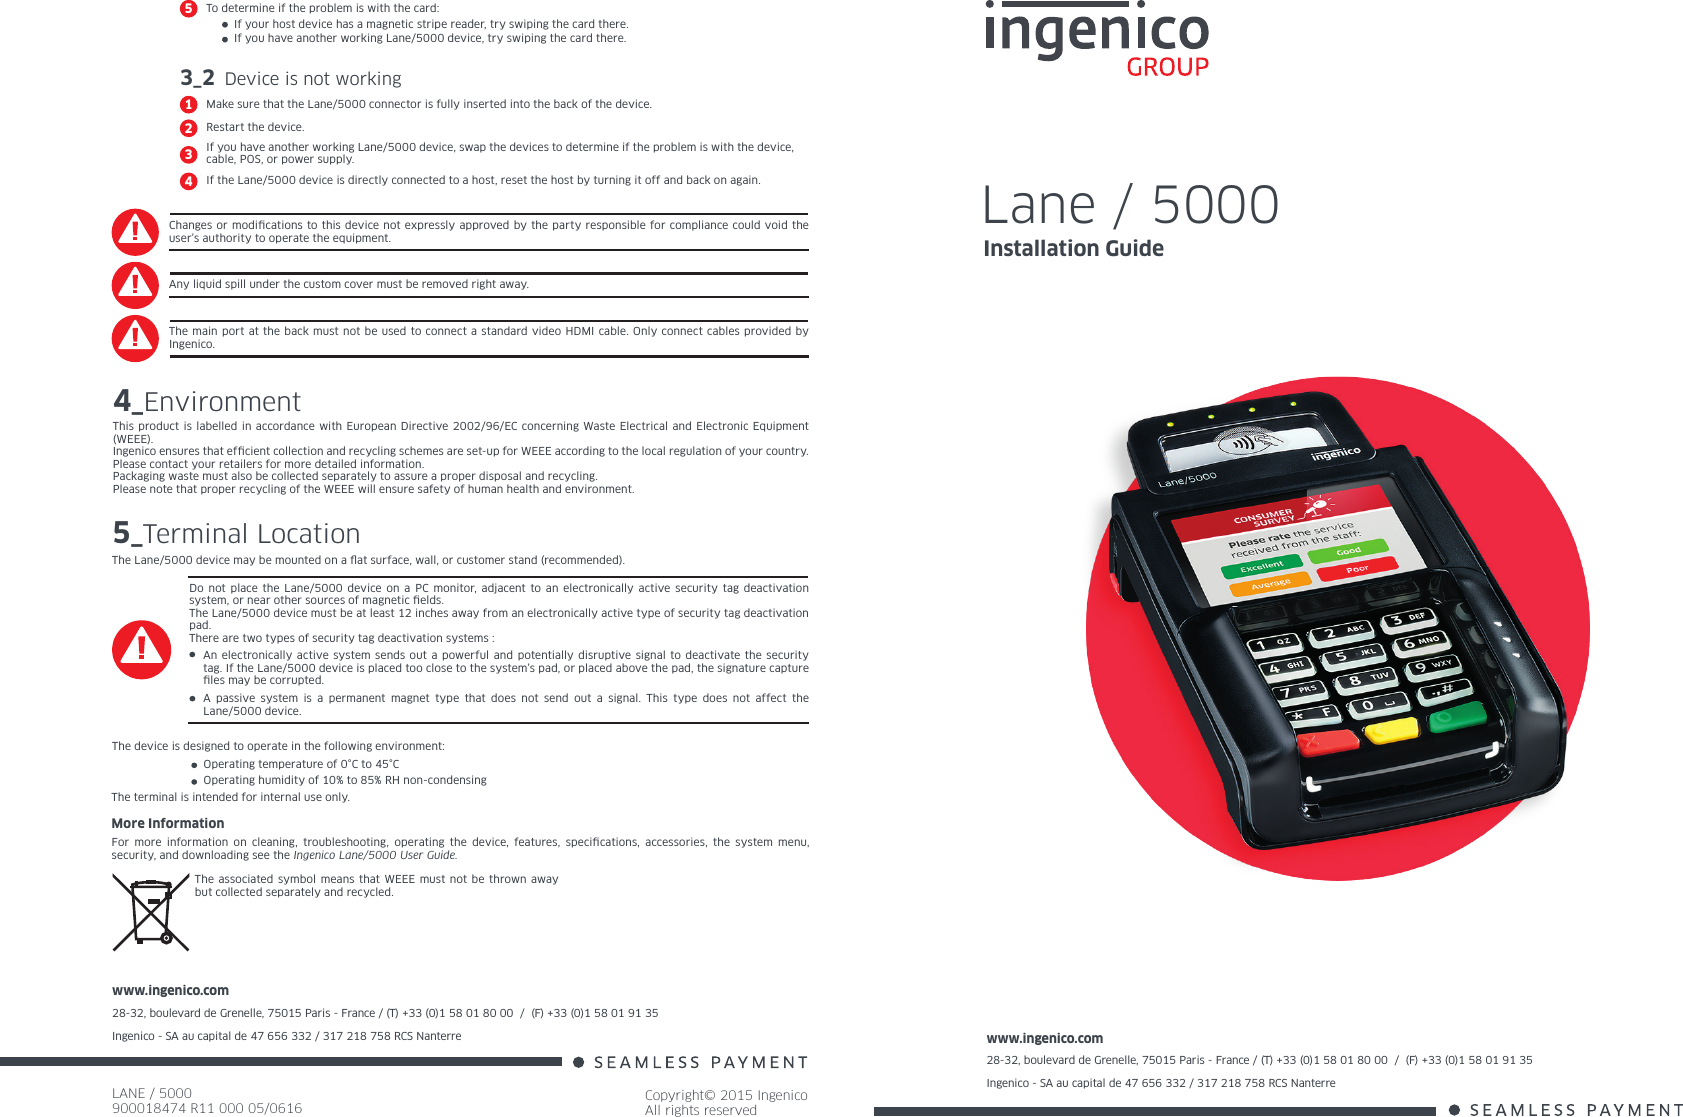 www.ingenico.com28-32, boulevard de Grenelle, 75015 Paris - France / (T) +33 (0)1 58 01 80 00  /  (F) +33 (0)1 58 01 91 35Ingenico - SA au capital de 47 656 332 / 317 218 758 RCS Nanterre LANE / 5000900018474 R11 000 05/0616Copyright© 2015 IngenicoAll rights reservedwww.ingenico.com28-32, boulevard de Grenelle, 75015 Paris - France / (T) +33 (0)1 58 01 80 00  /  (F) +33 (0)1 58 01 91 35Ingenico - SA au capital de 47 656 332 / 317 218 758 RCS Nanterre Changes or modications to this device not expressly approved by the party responsible for compliance could void the user’s authority to operate the equipment.Any liquid spill under the custom cover must be removed right away.The main port at the back must not be used to connect a standard video HDMI cable. Only connect cables provided by Ingenico.4_EnvironmentThis product is labelled in accordance with European Directive 2002/96/EC concerning Waste Electrical and Electronic Equipment (WEEE).Ingenico ensures that efcient collection and recycling schemes are set-up for WEEE according to the local regulation of your country. Please contact your retailers for more detailed information.Packaging waste must also be collected separately to assure a proper disposal and recycling. Please note that proper recycling of the WEEE will ensure safety of human health and environment.More InformationFor more information on cleaning, troubleshooting, operating the device, features, specications, accessories, the system menu, security, and downloading see the Ingenico Lane/5000 User Guide.The associated symbol means that WEEE must not be thrown away but collected separately and recycled.5_Terminal LocationThe Lane/5000 device may be mounted on a at surface, wall, or customer stand (recommended).The device is designed to operate in the following environment:Operating temperature of 0°C to 45°C Operating humidity of 10% to 85% RH non-condensingThe terminal is intended for internal use only.Do not place the Lane/5000 device on a PC monitor, adjacent to an electronically active security tag deactivation system, or near other sources of magnetic elds.The Lane/5000 device must be at least 12 inches away from an electronically active type of security tag deactivation pad.There are two types of security tag deactivation systems :An electronically active system sends out a powerful and potentially disruptive signal to deactivate the security tag. If the Lane/5000 device is placed too close to the system’s pad, or placed above the pad, the signature capture les may be corrupted.A passive system is a permanent magnet type that does not send out a signal. This type does not affect the Lane/5000 device.3_2 Device is not workingMake sure that the Lane/5000 connector is fully inserted into the back of the device.1Restart the device.2If you have another working Lane/5000 device, swap the devices to determine if the problem is with the device, cable, POS, or power supply.3If the Lane/5000 device is directly connected to a host, reset the host by turning it off and back on again.4Lane / 5000Installation GuideIf your host device has a magnetic stripe reader, try swiping the card there.If you have another working Lane/5000 device, try swiping the card there.To determine if the problem is with the card:5